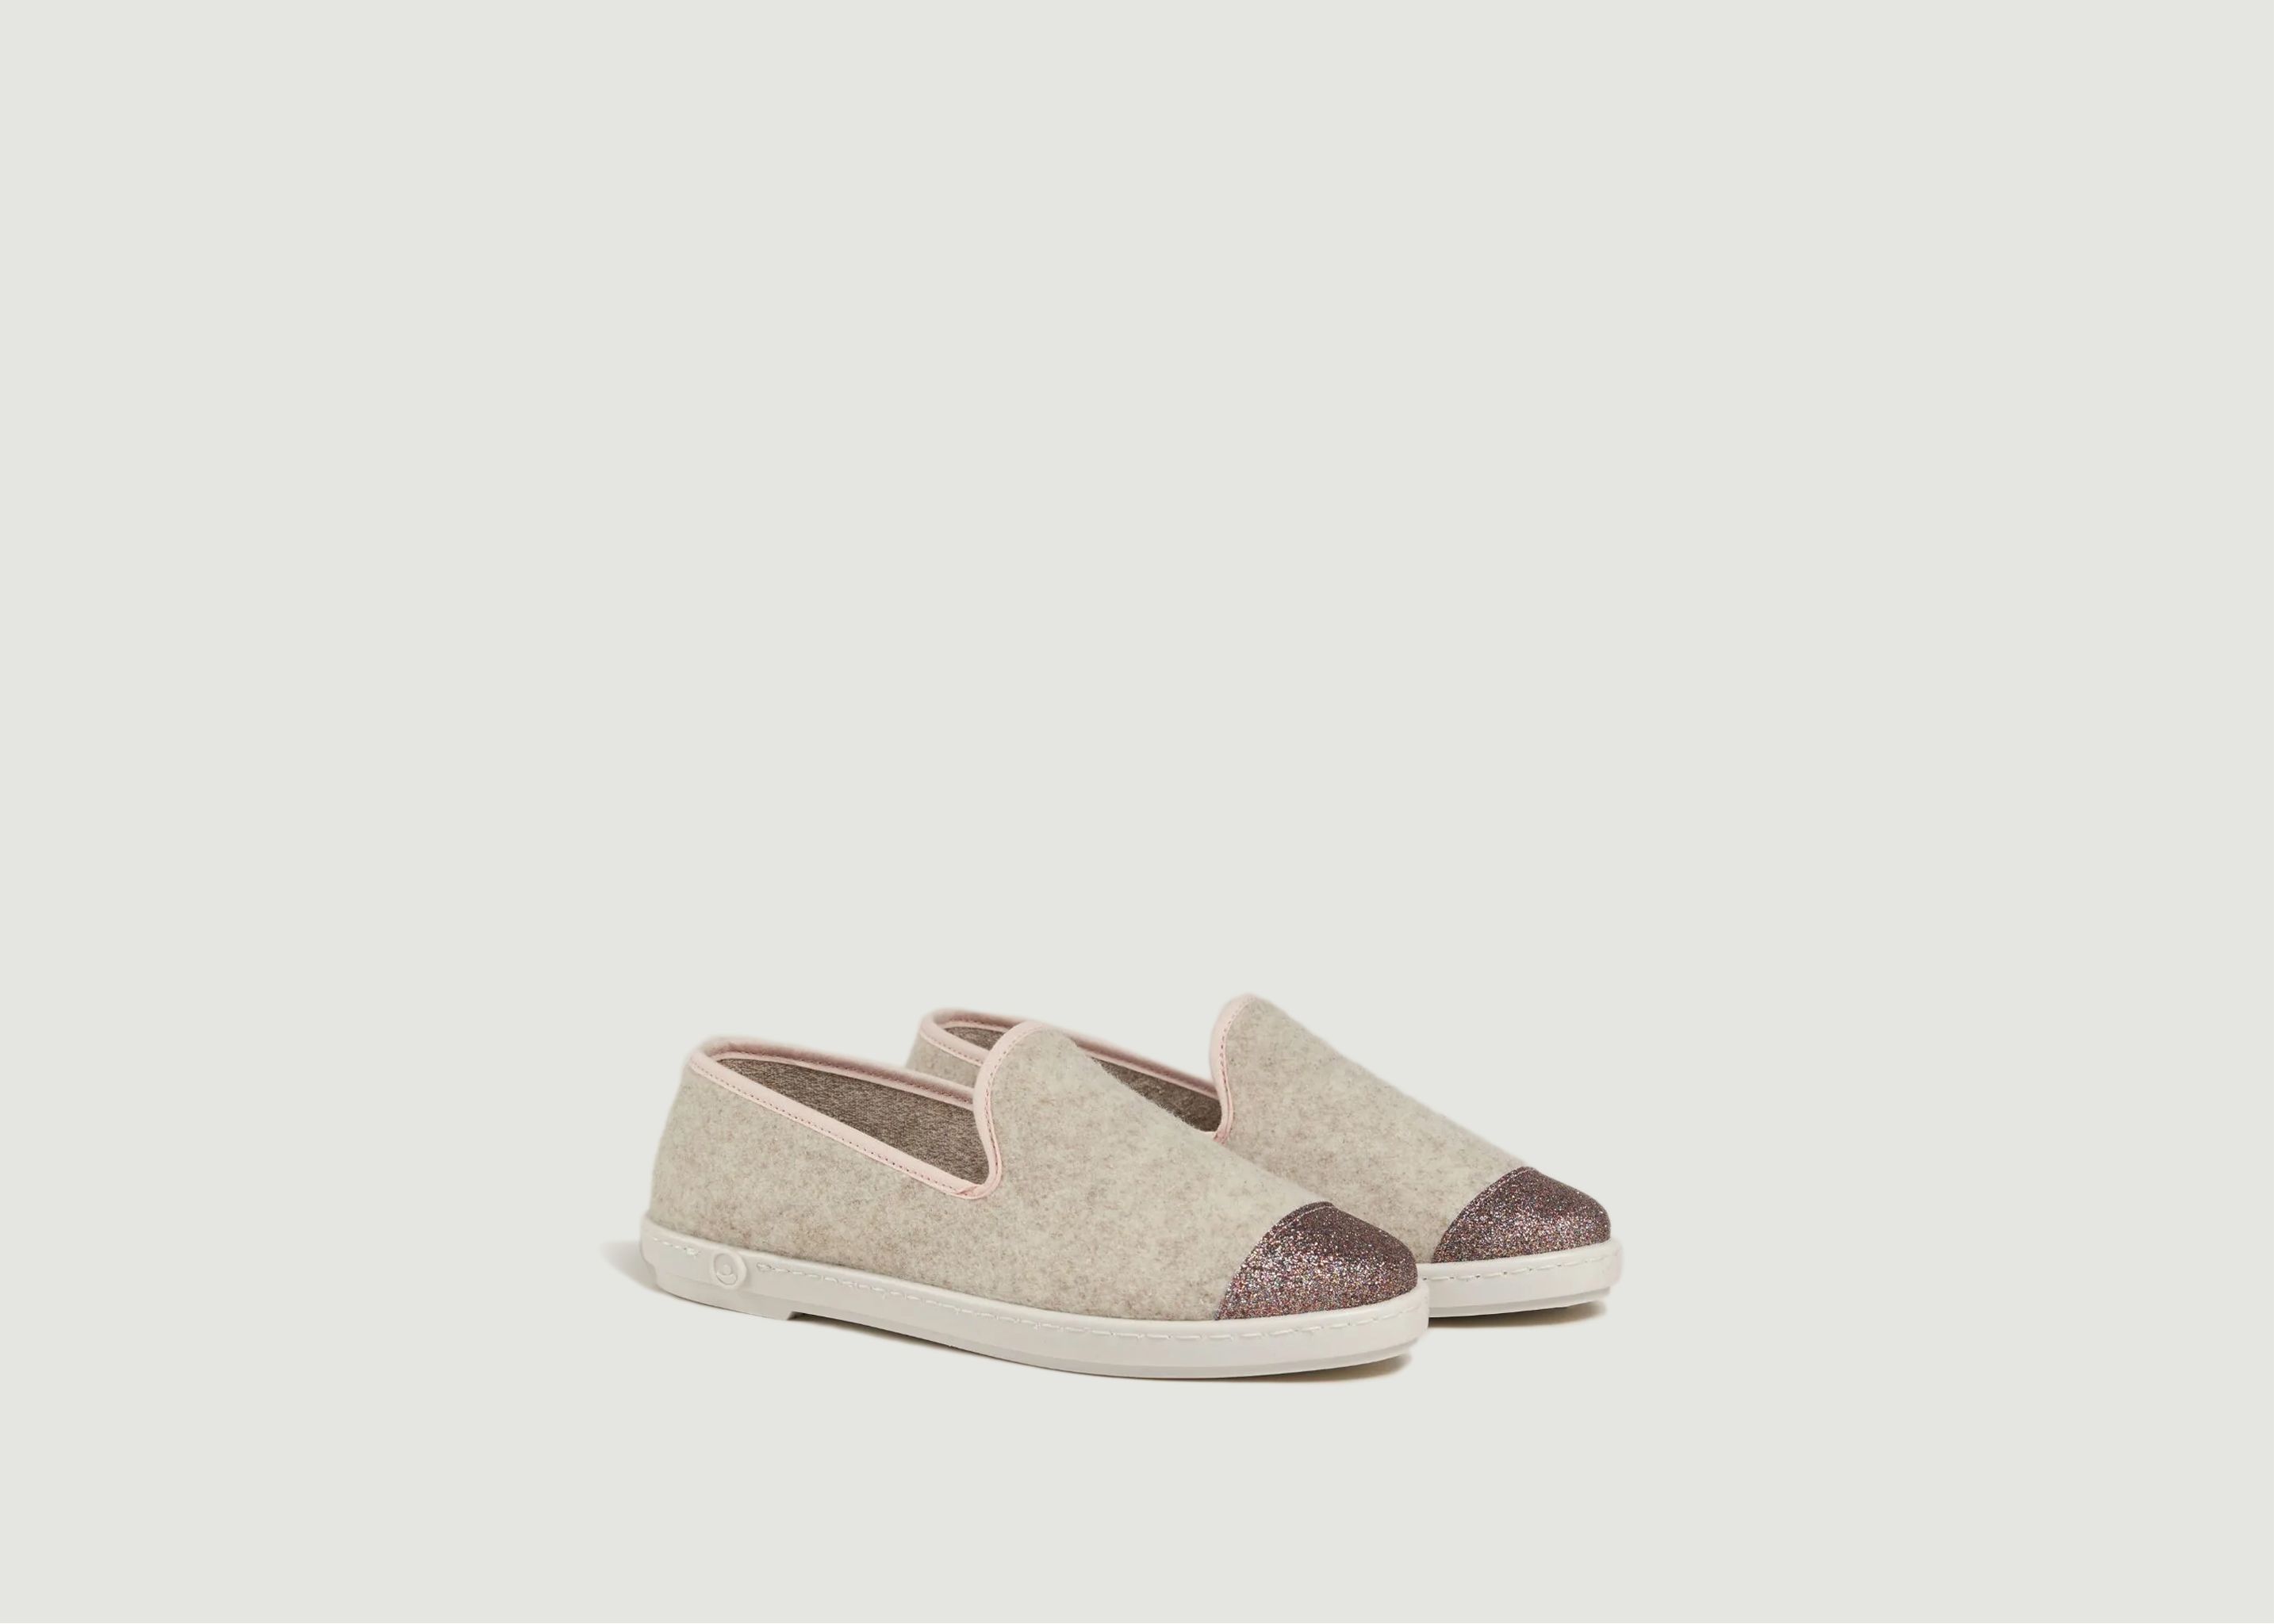 AW Recycled Wool Slipper - Angarde